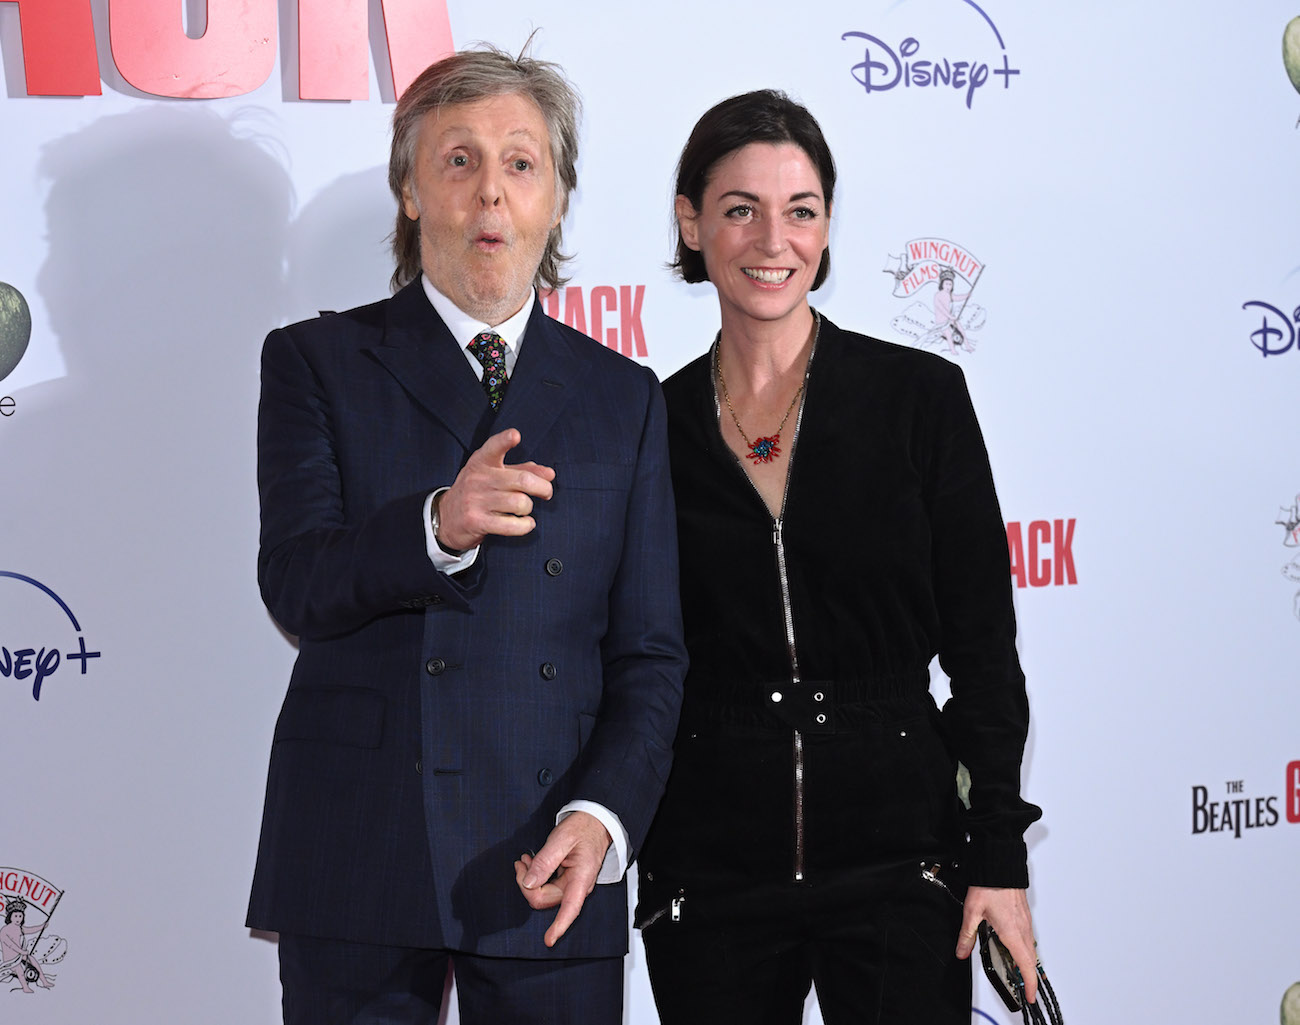 Paul McCartney and his daughter Mary McCartney at the UK premiere of 'The Beatles: Get Back.'